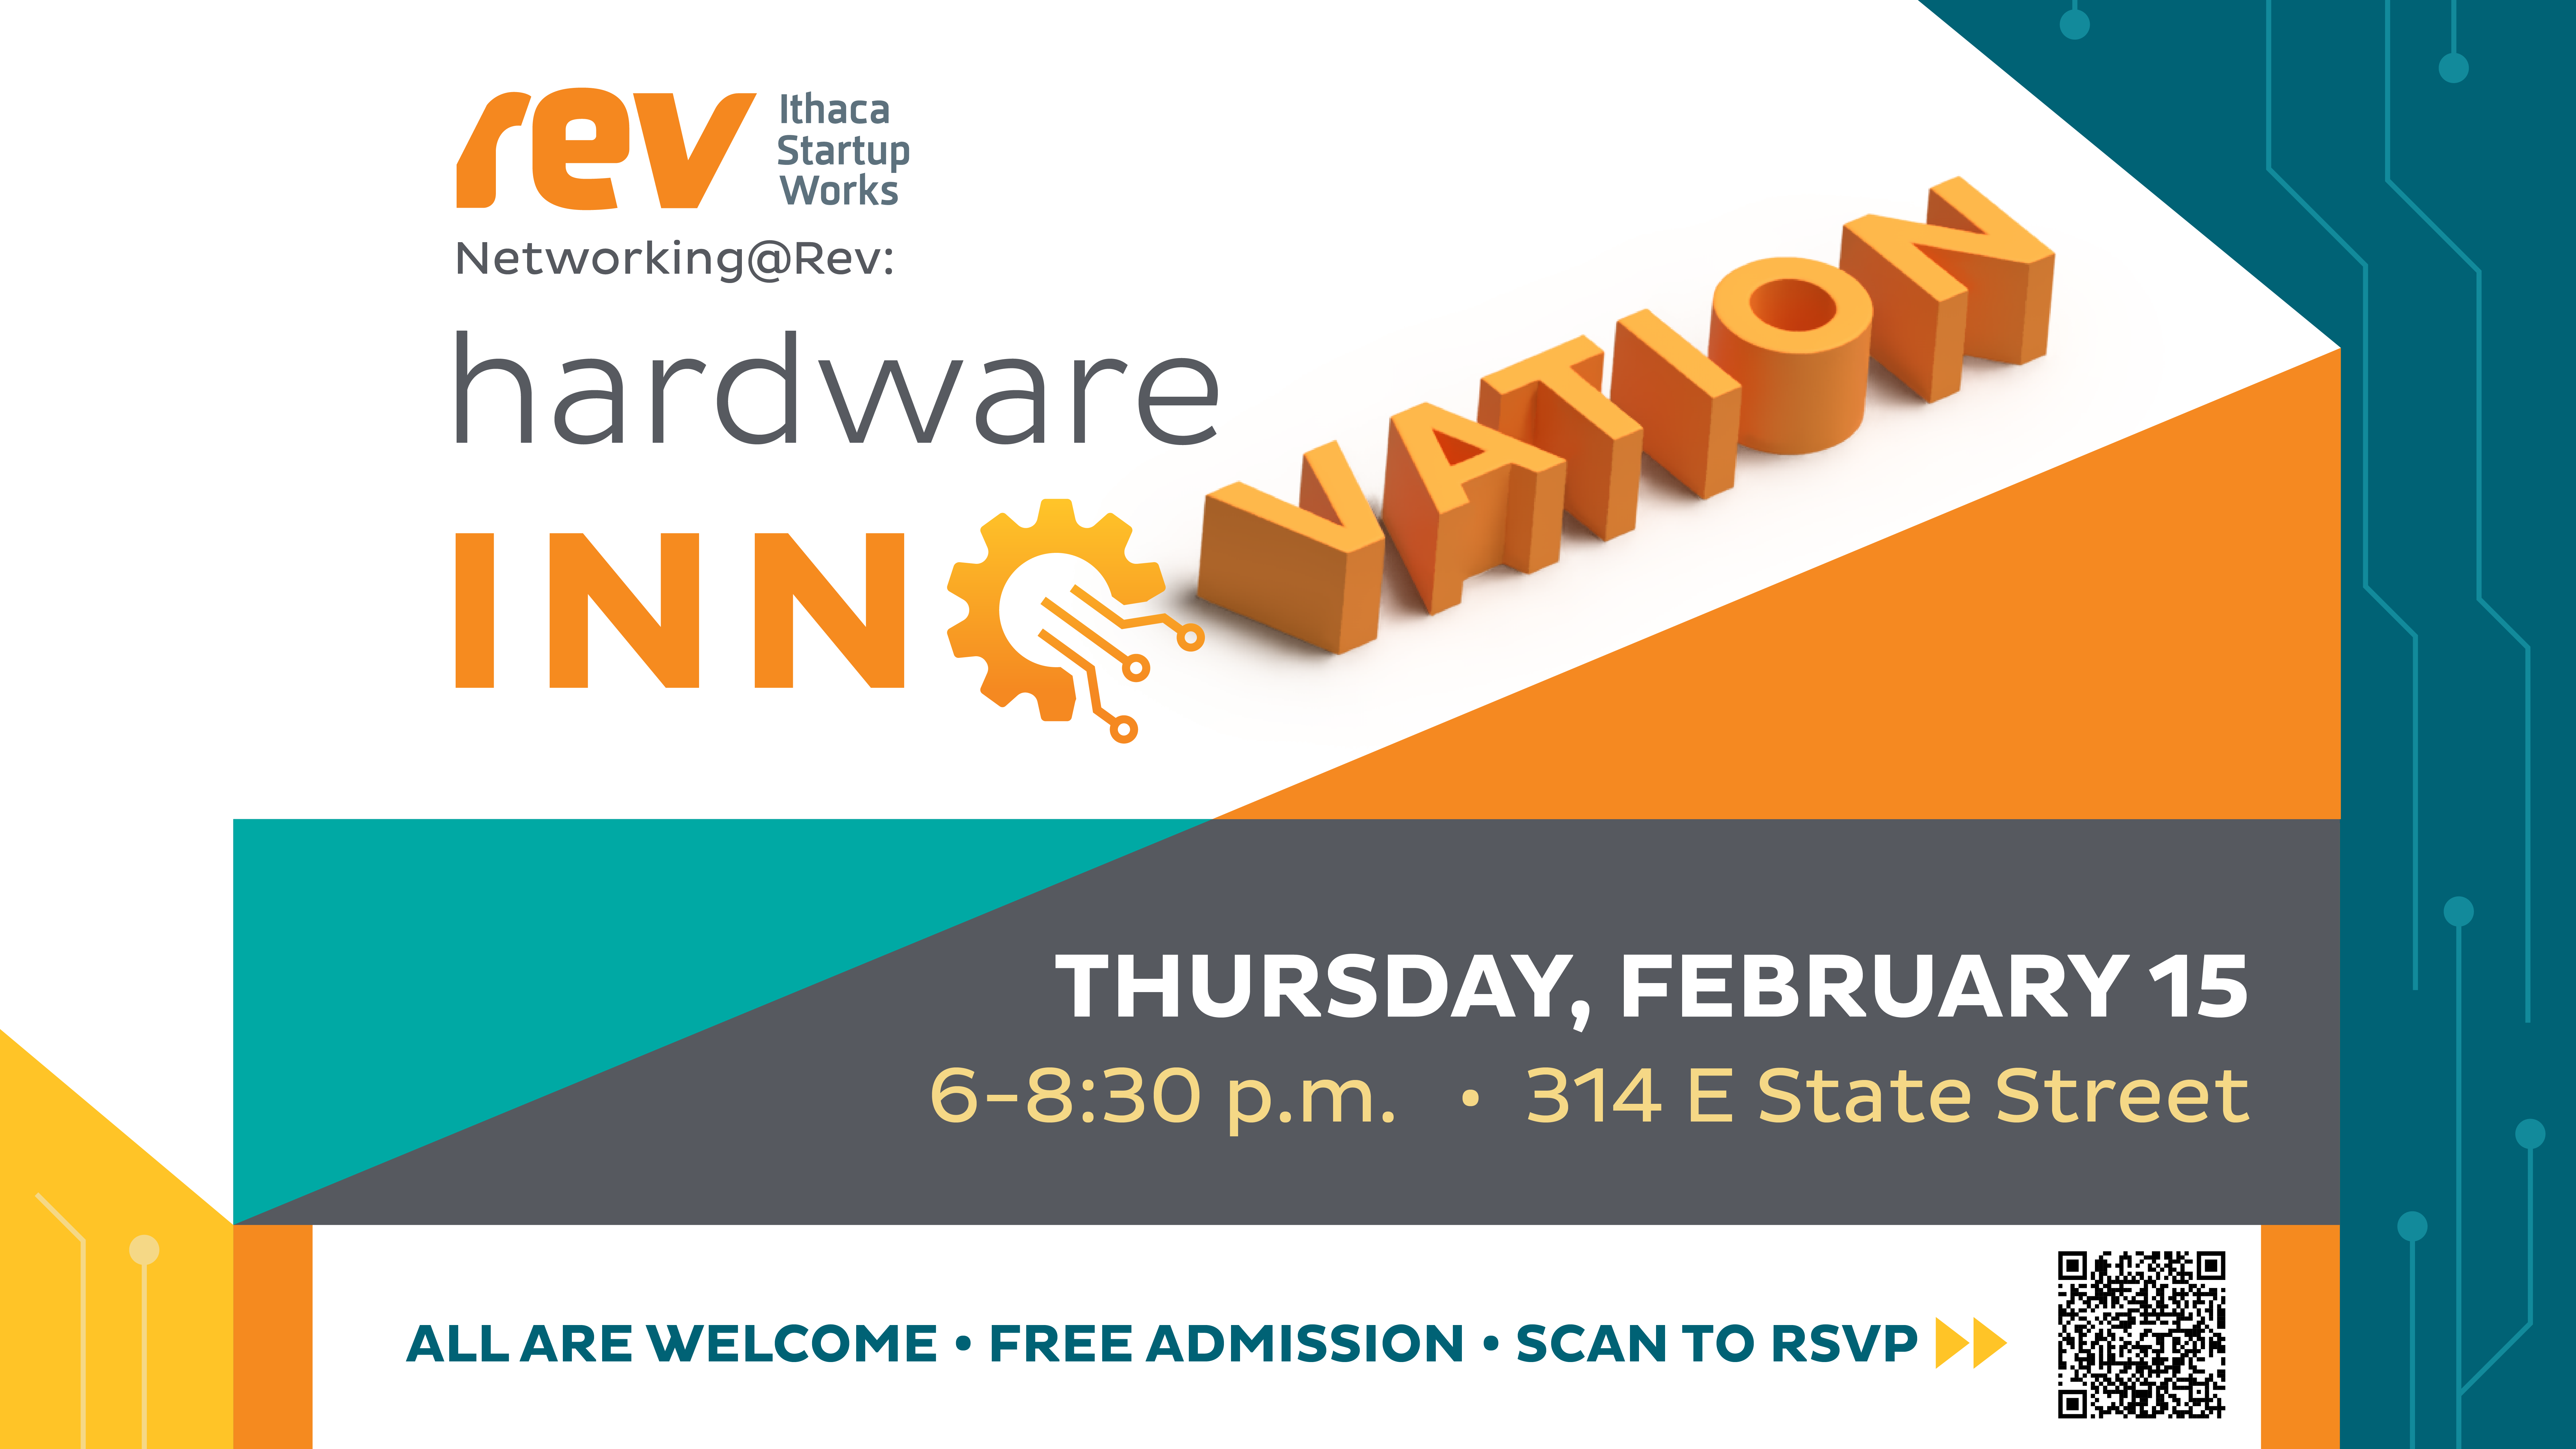 Graphic for Rev Ithaca Startup Works Hardware Innovation Networking Night.